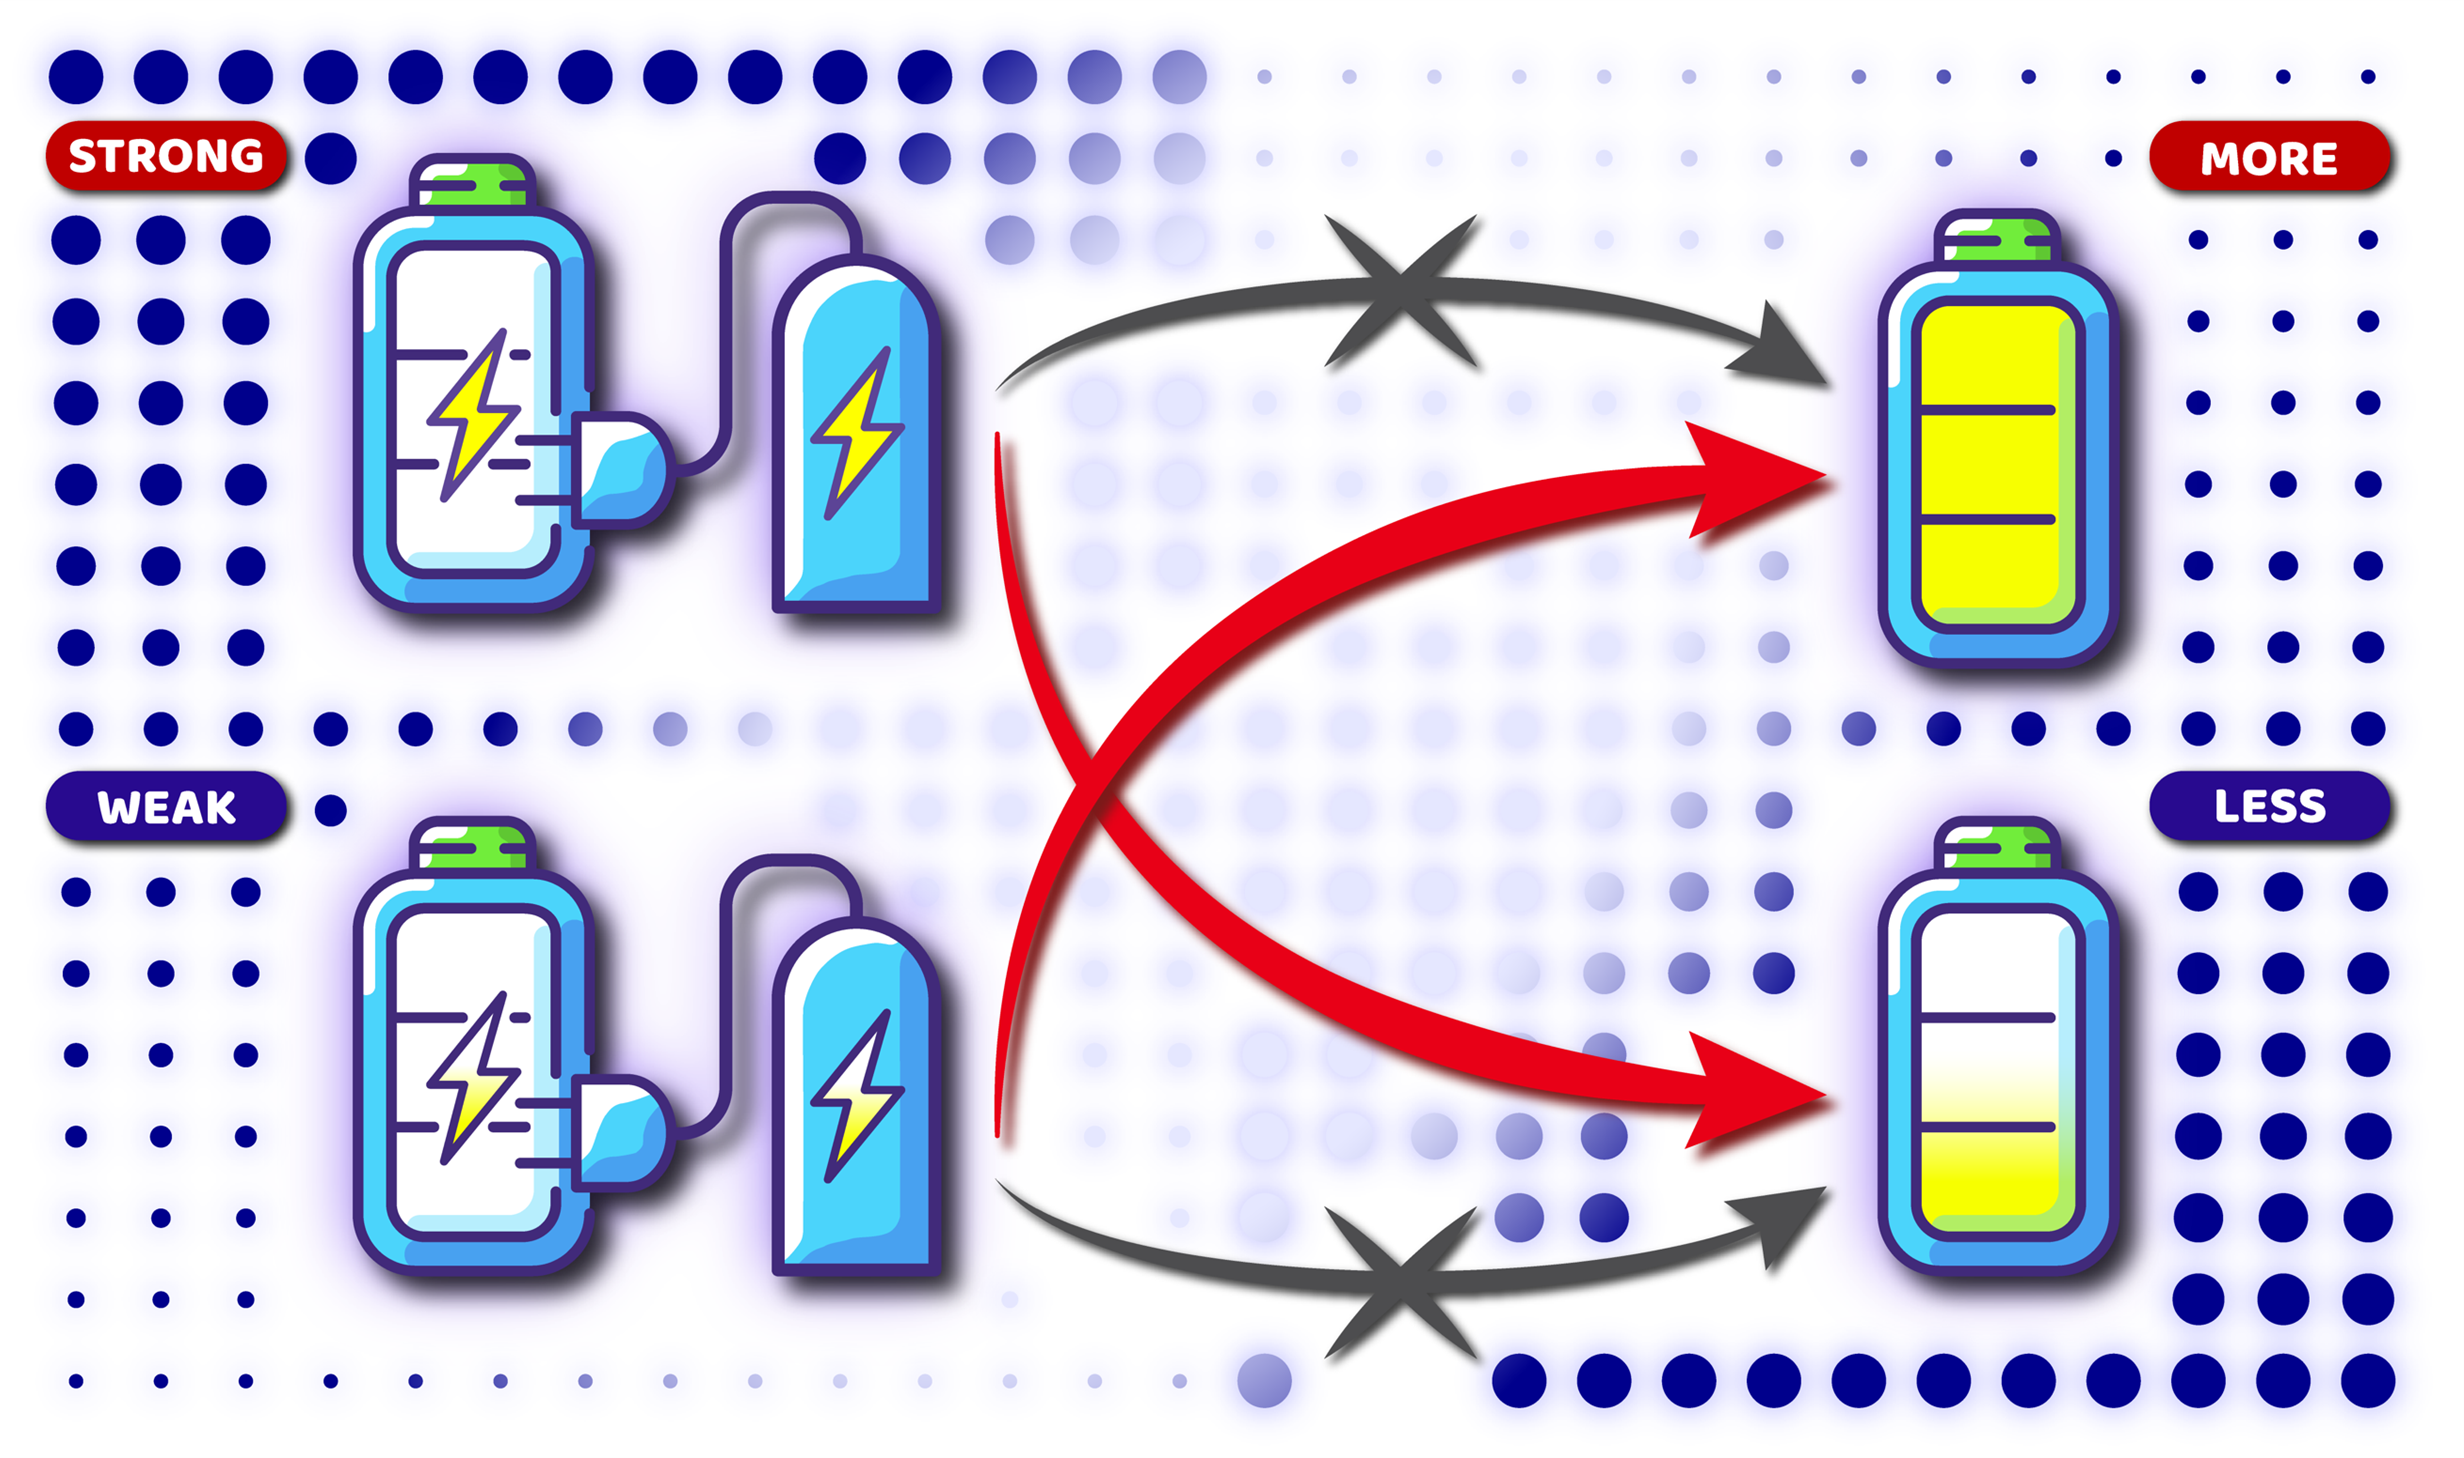 Four graphics of batteries with arrows pointing between them